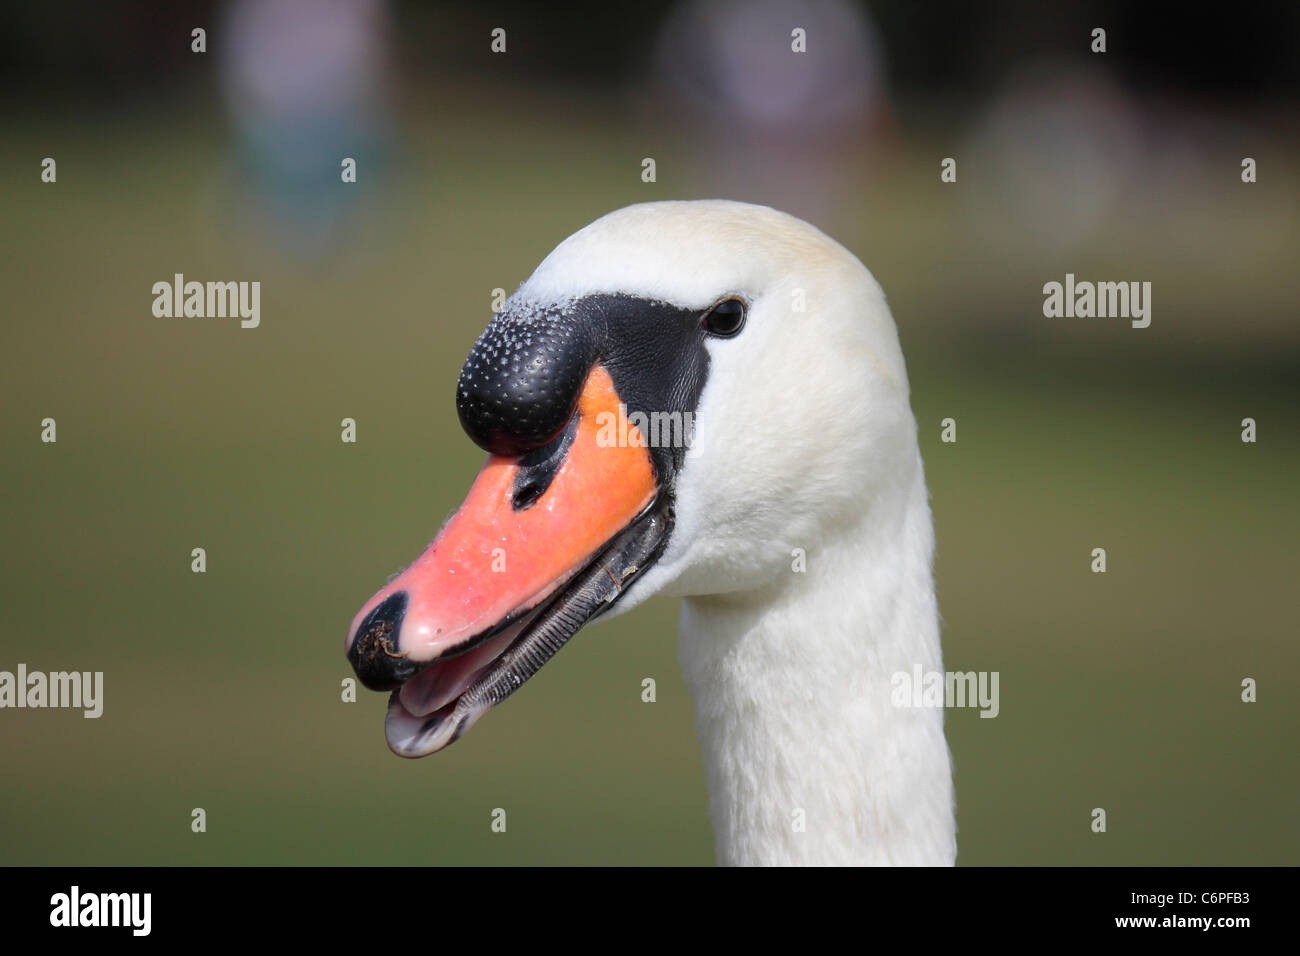 Close up of a white male mute swan's head with its beak slightly open revealing its tongue and the serrations along its beak. Stock Photo